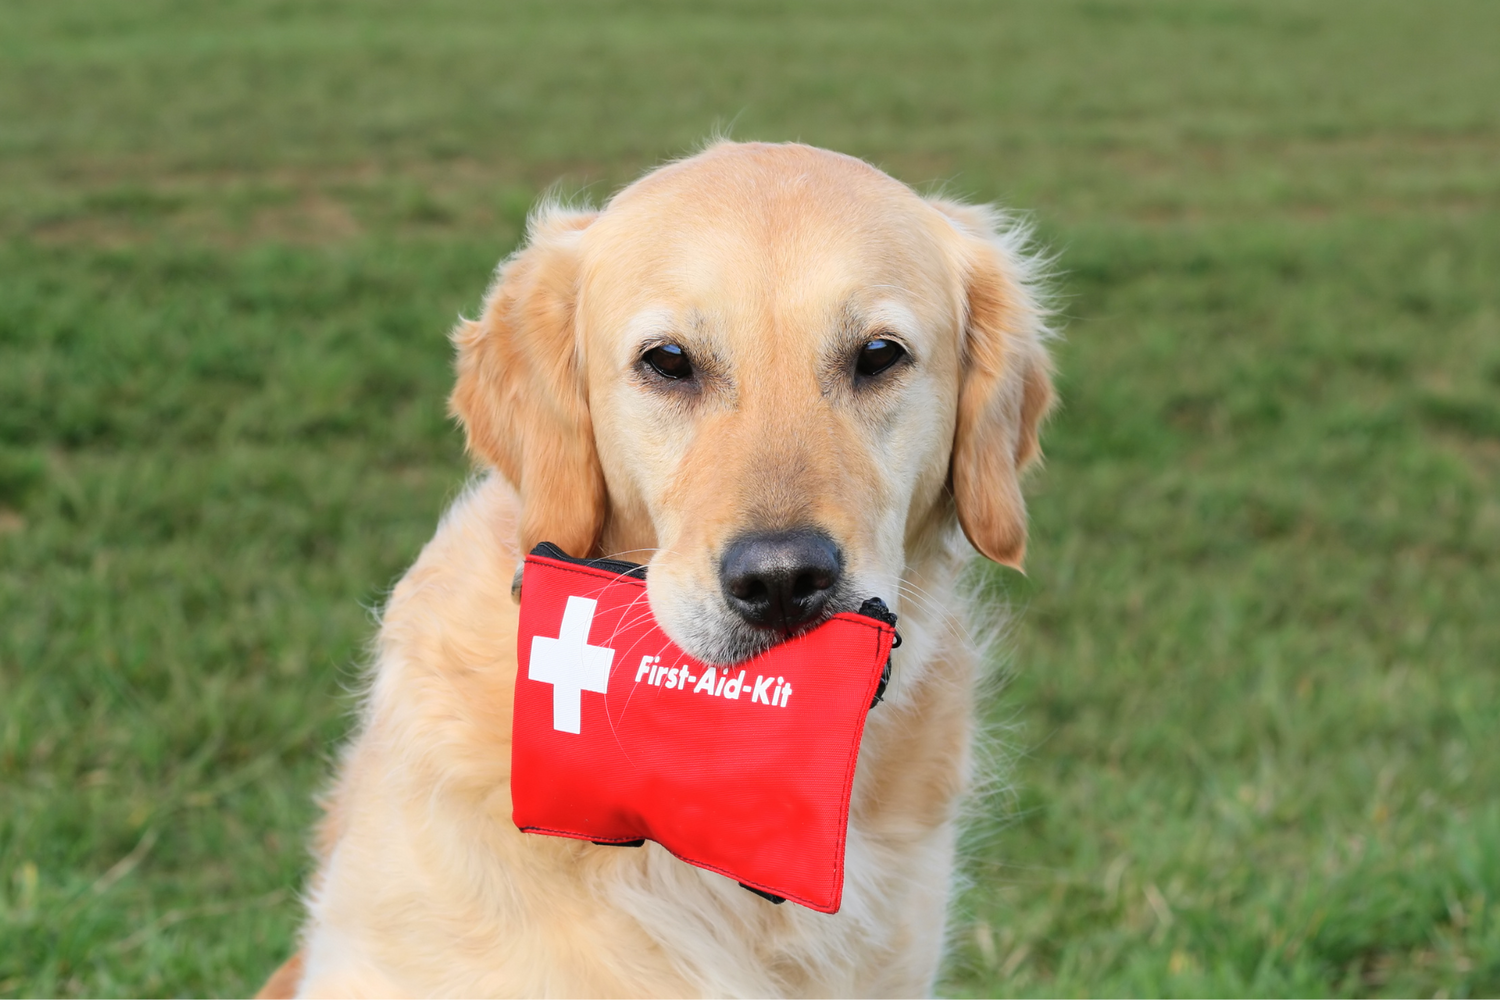 Our Must-Haves in Your Pet's First Aid Kit